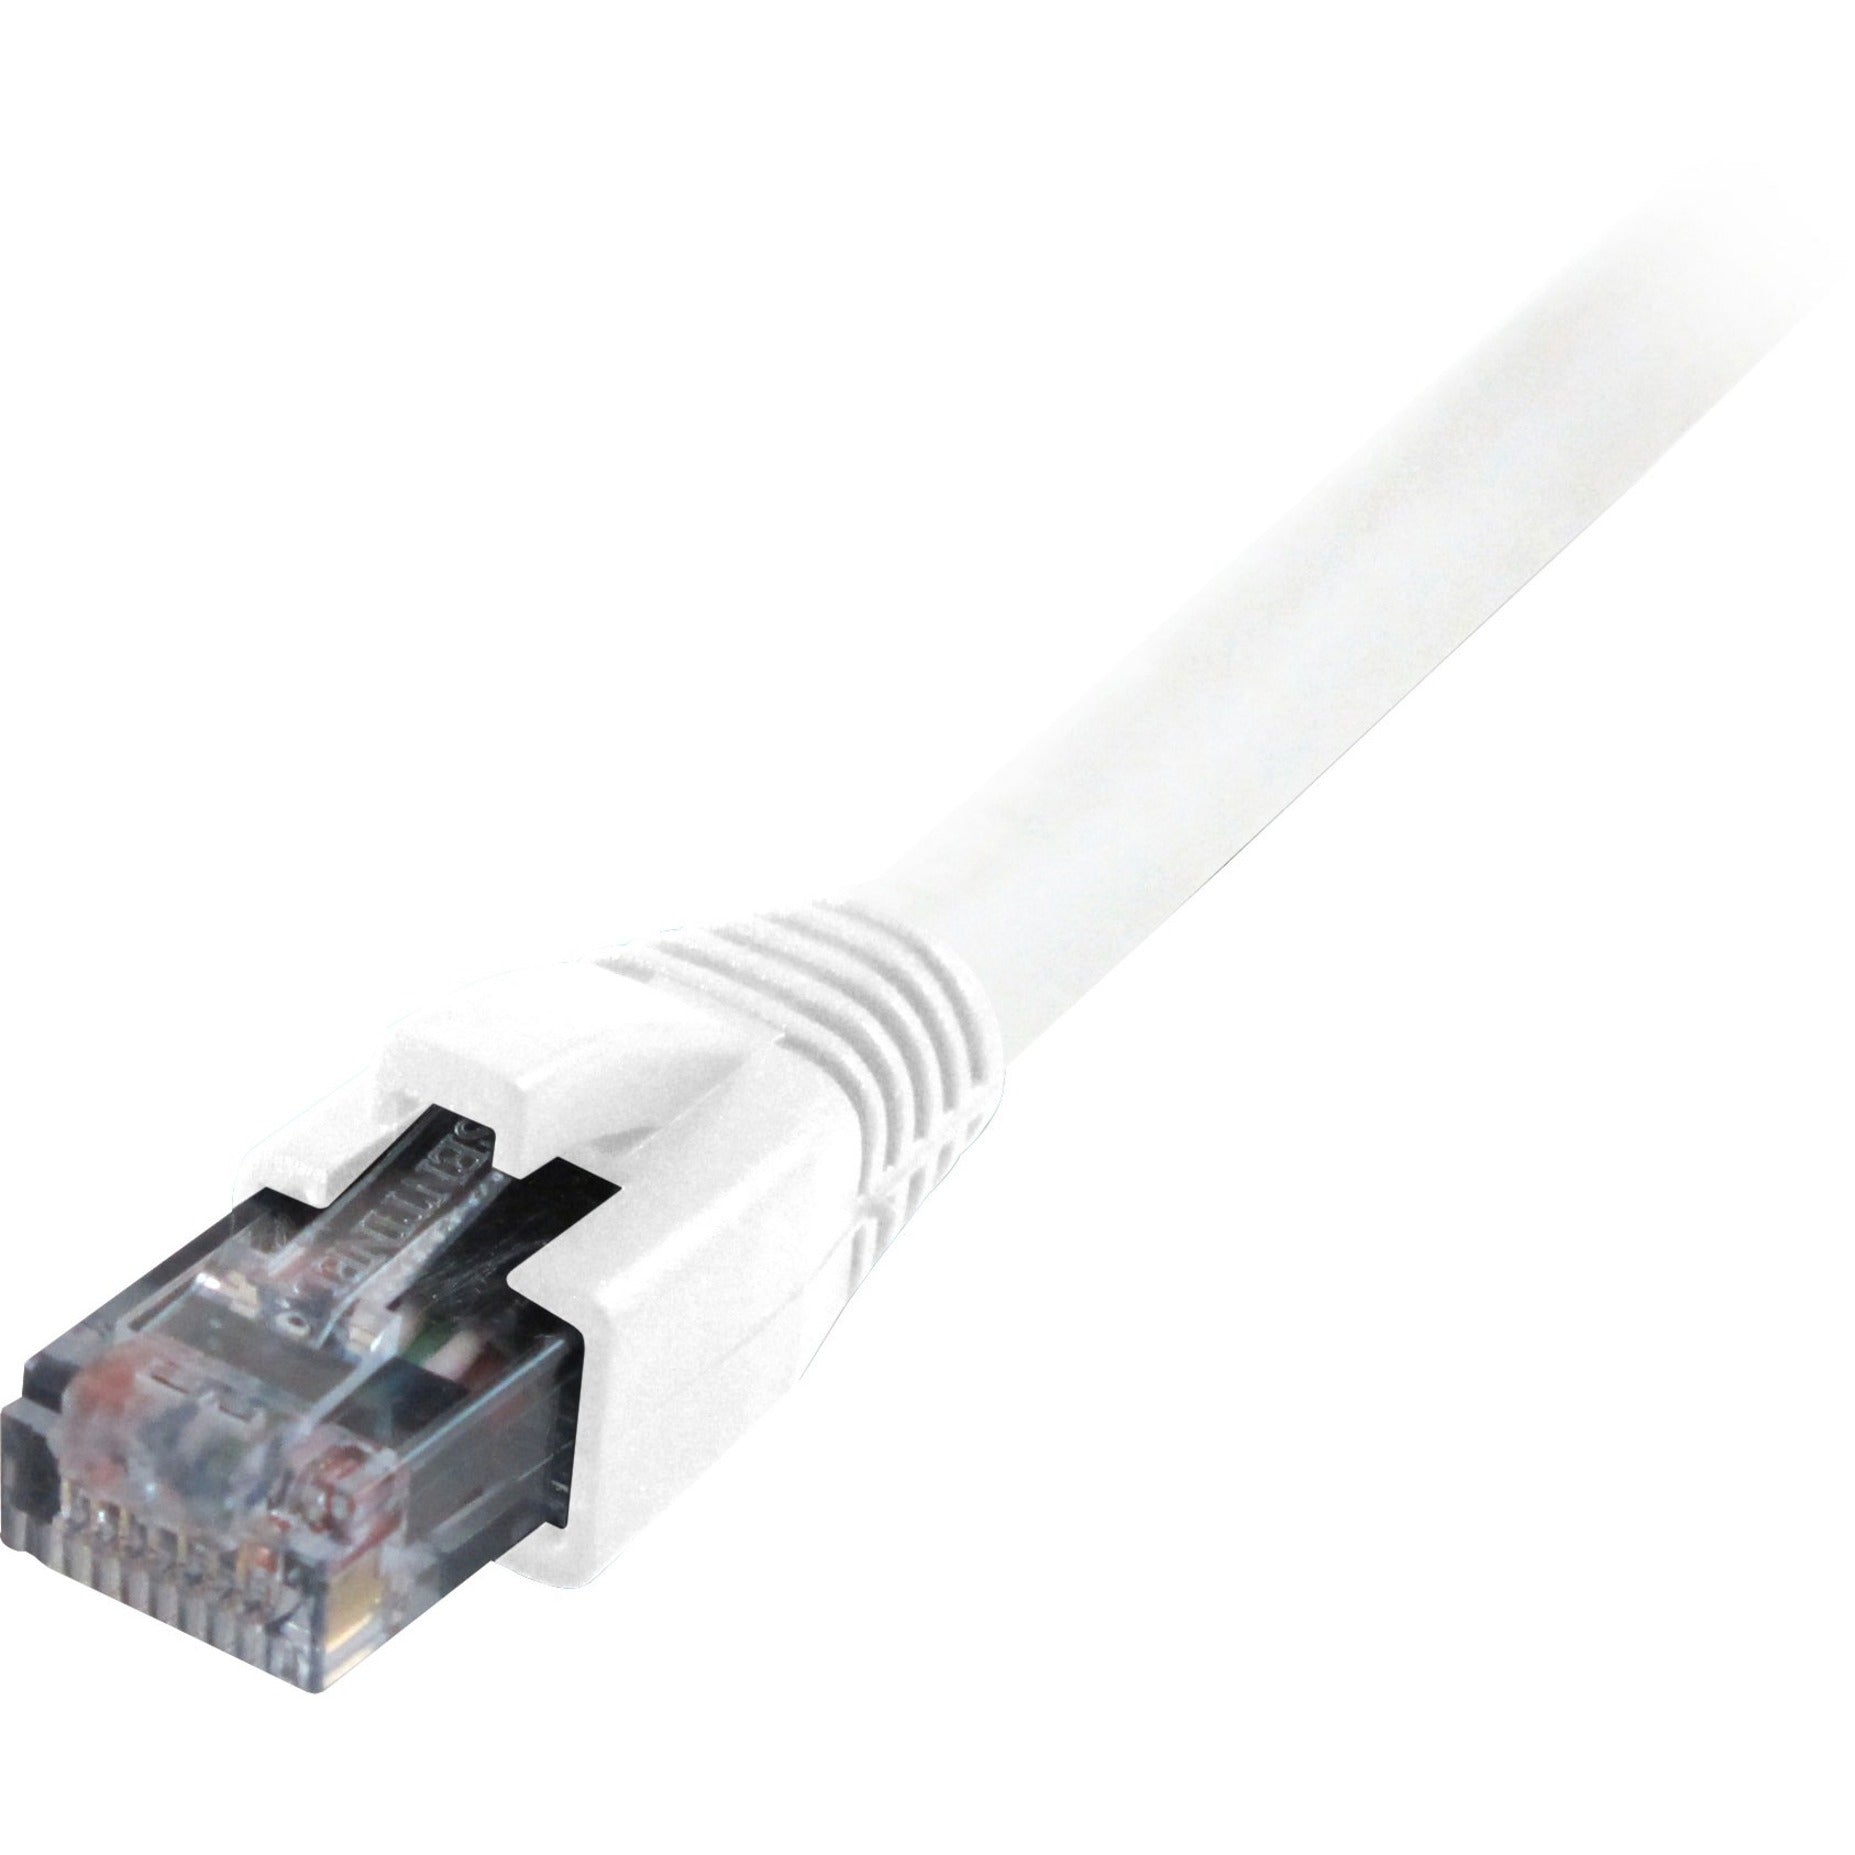 Comprehensive CAT5-350-100WHT Cat5e 350 Mhz Snagless Patch Cable 100ft White, Stranded, Molded, 1 Gbit/s Data Transfer Rate